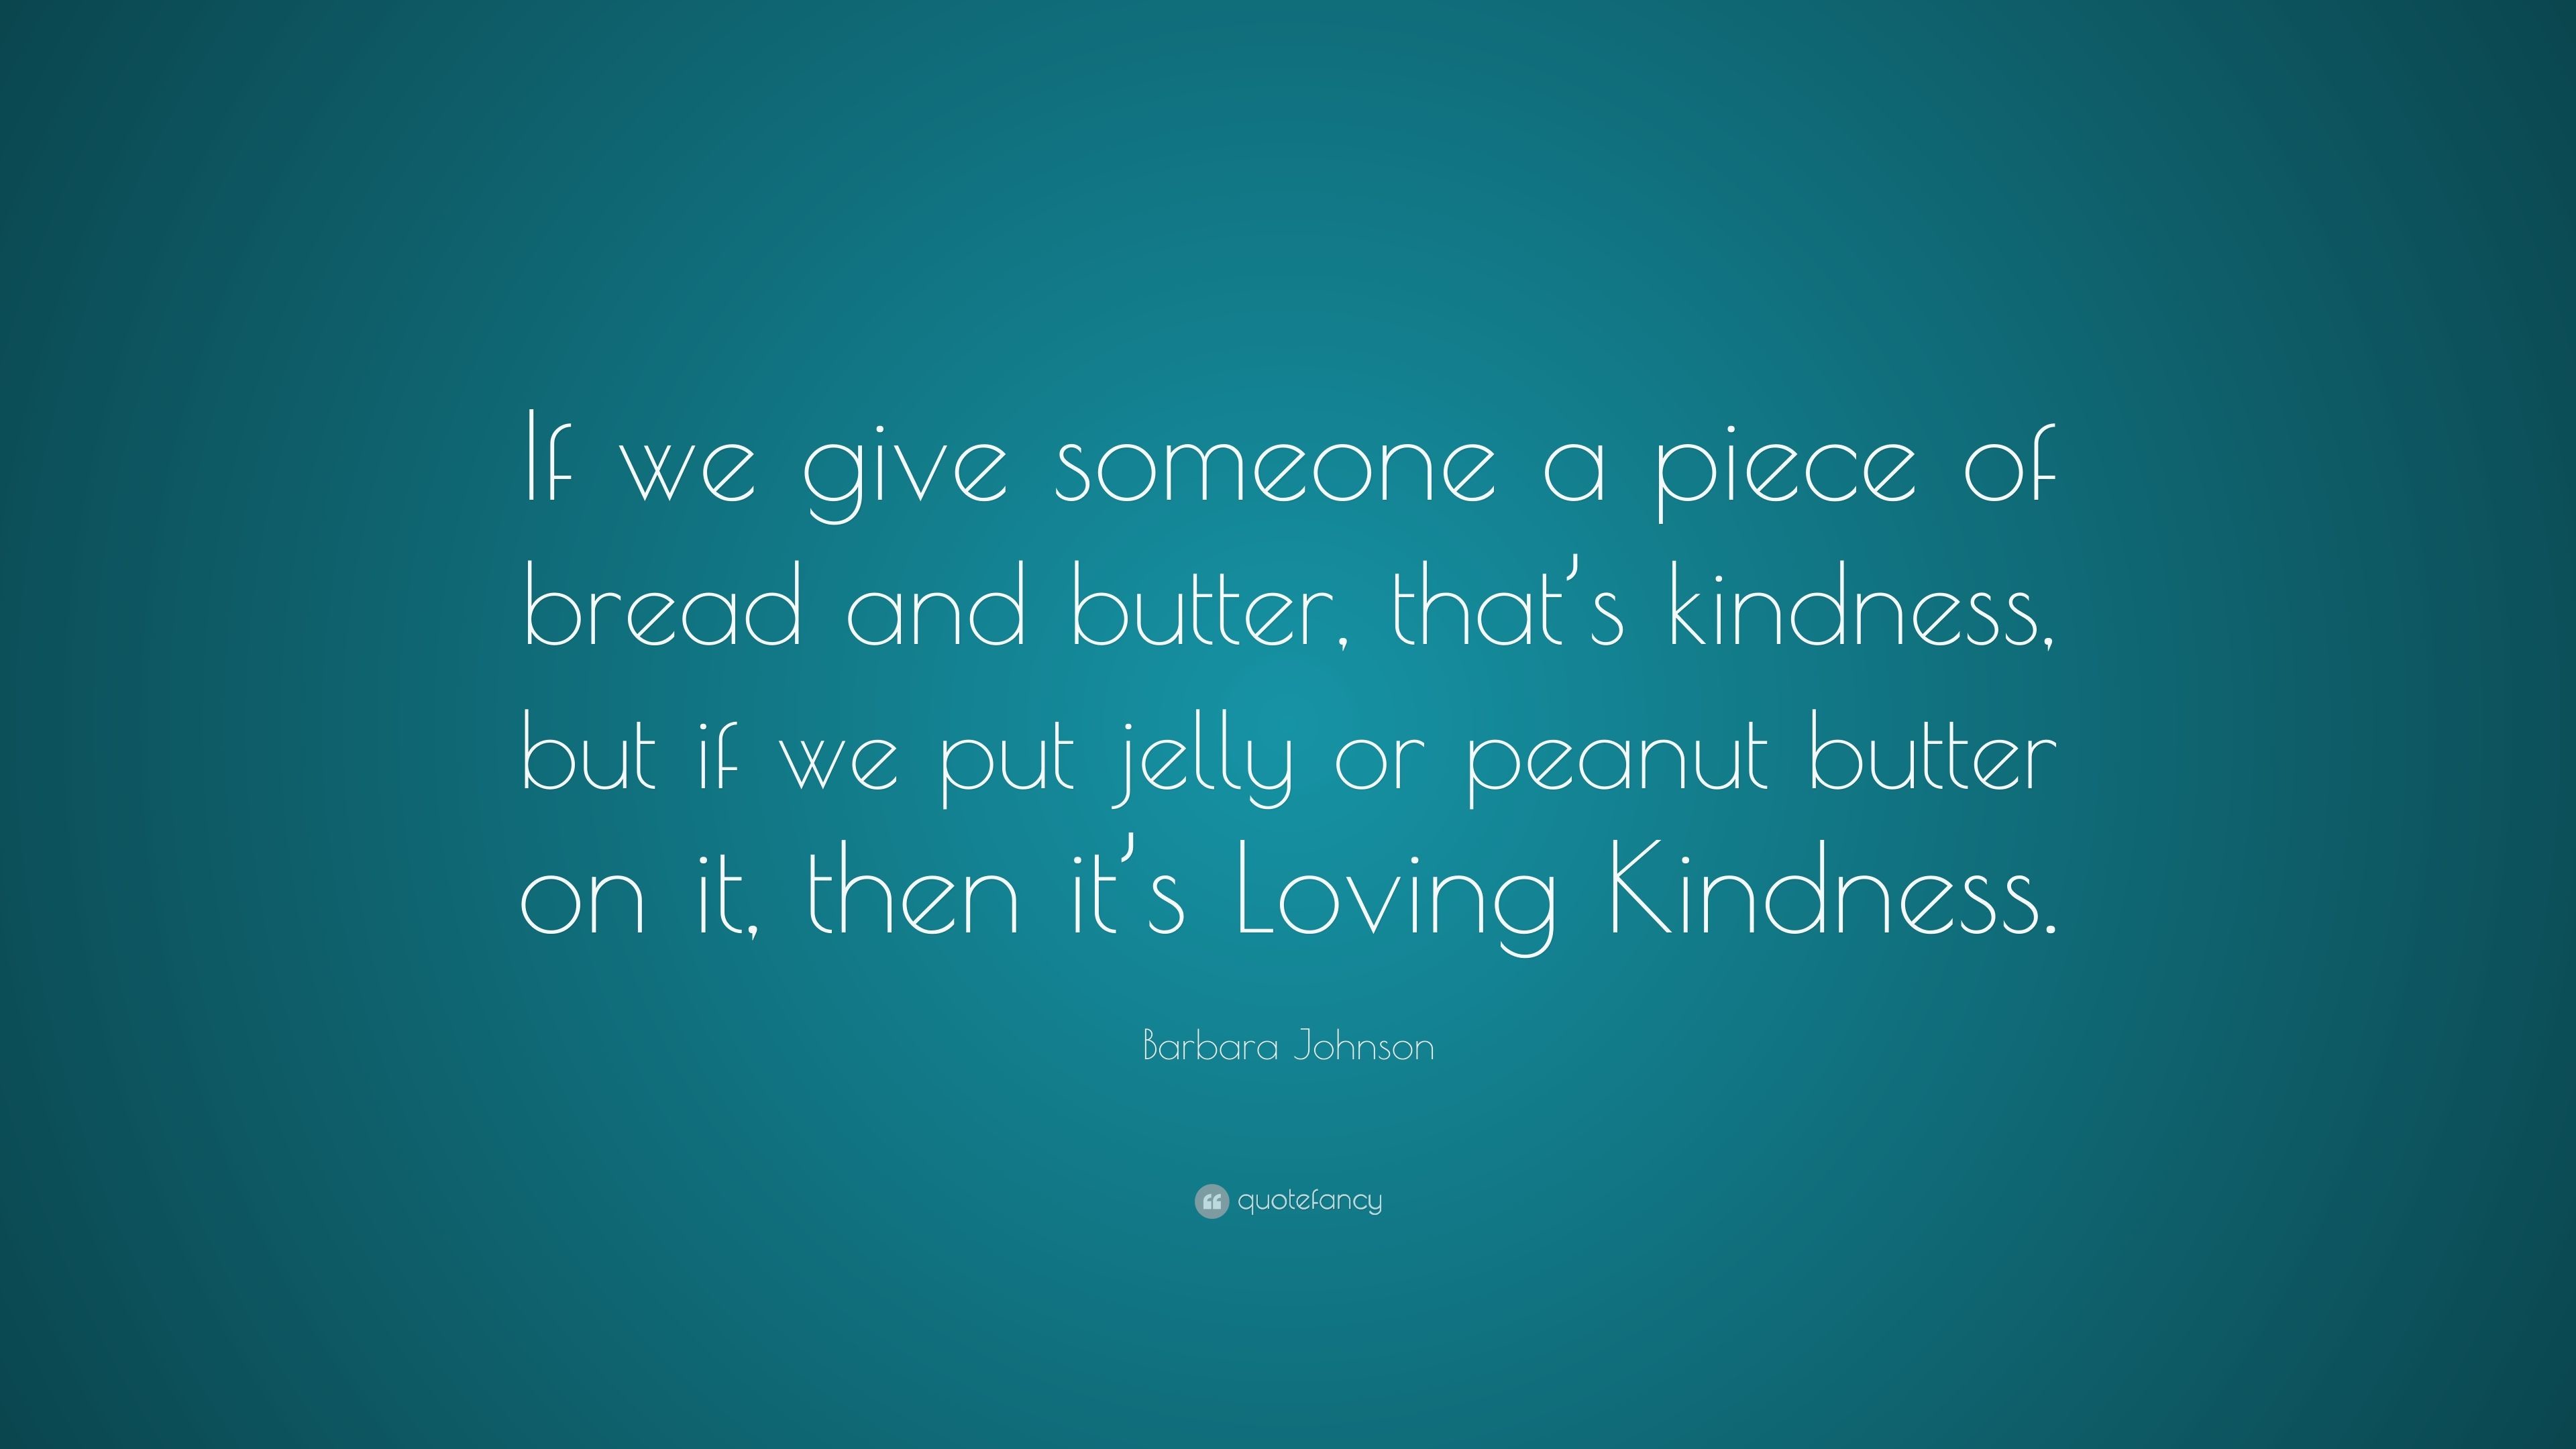 3840x2160 Barbara Johnson Quote: “If we give someone a piece of bread and butter,